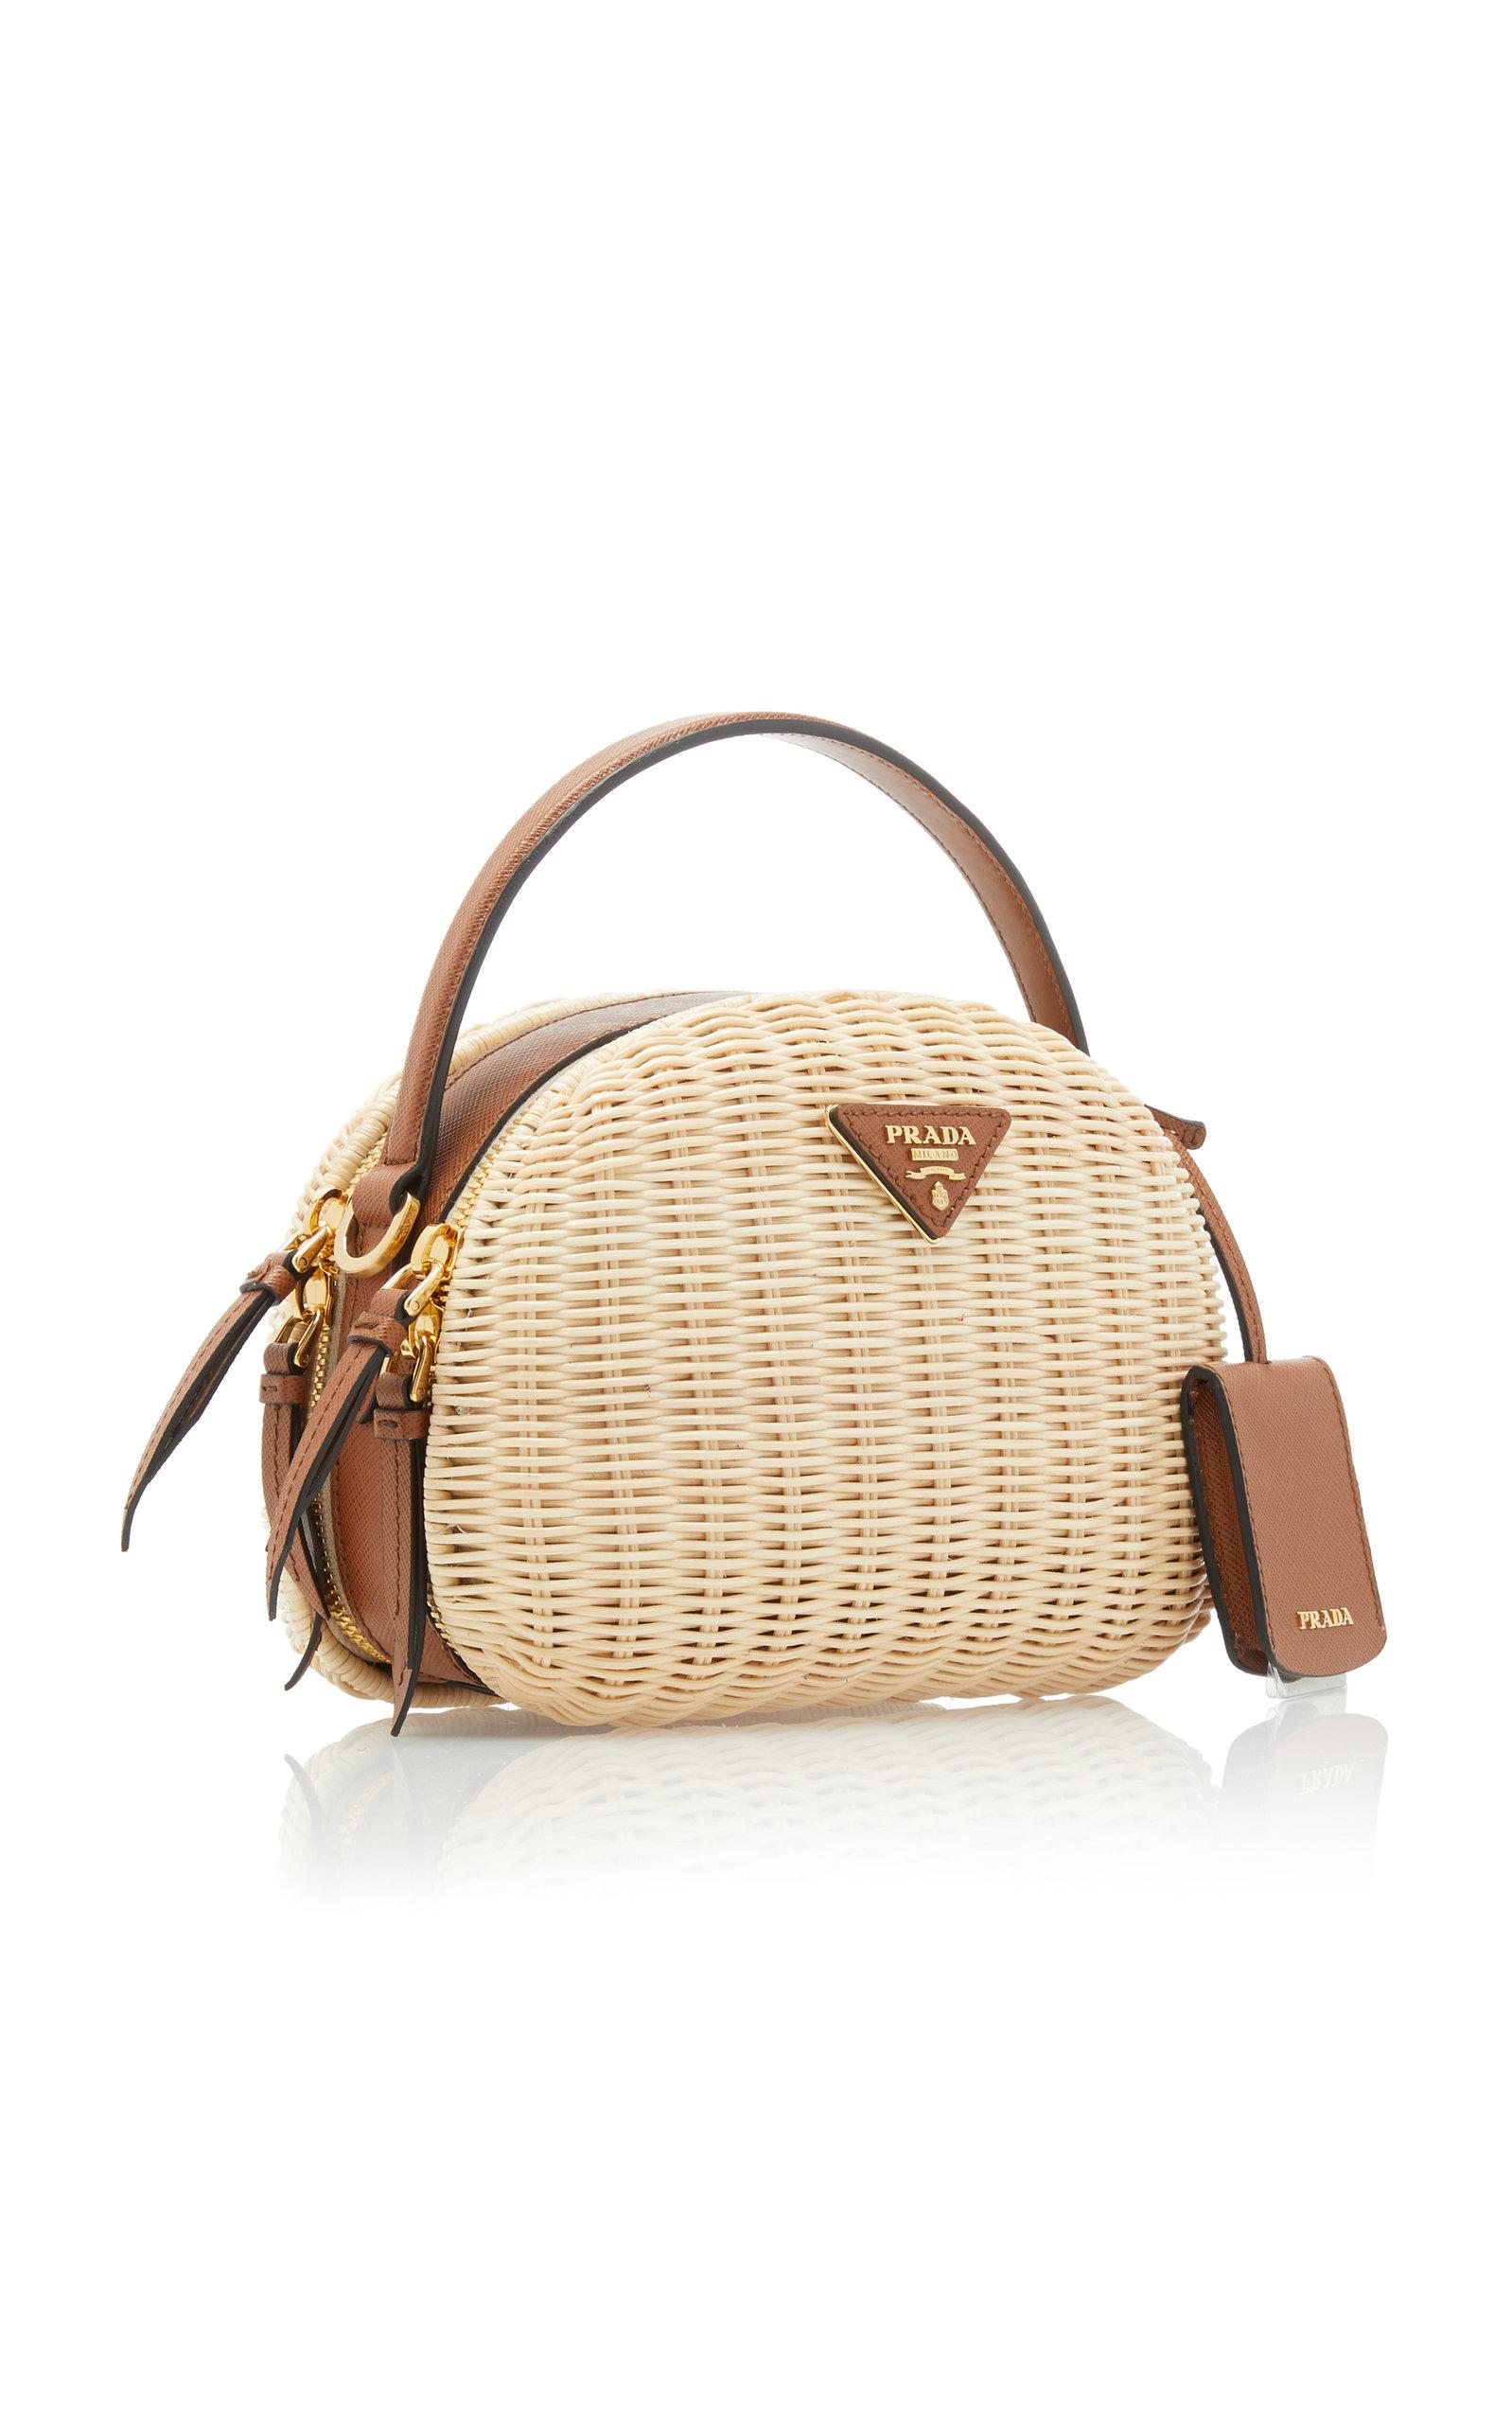 Prada Canvas Wicker And Saffiano Leather Shoulder Bag in Natural | Lyst